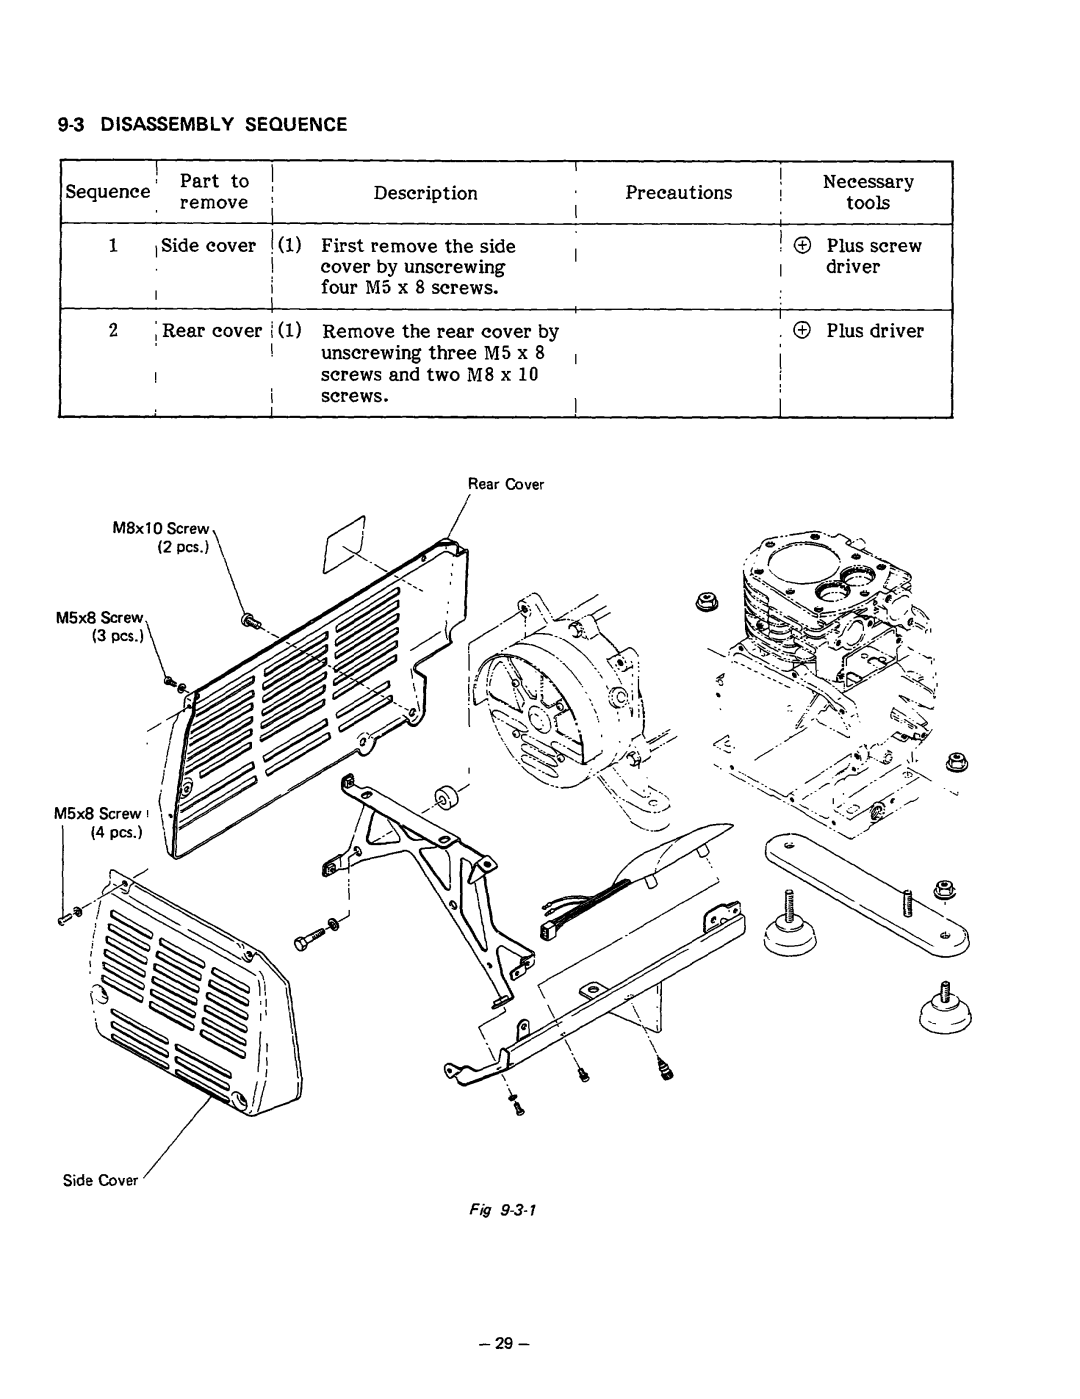 Subaru Robin Power Products R1200 service manual ISequenceI Part to ! , remove j 1 1Side cover !1 